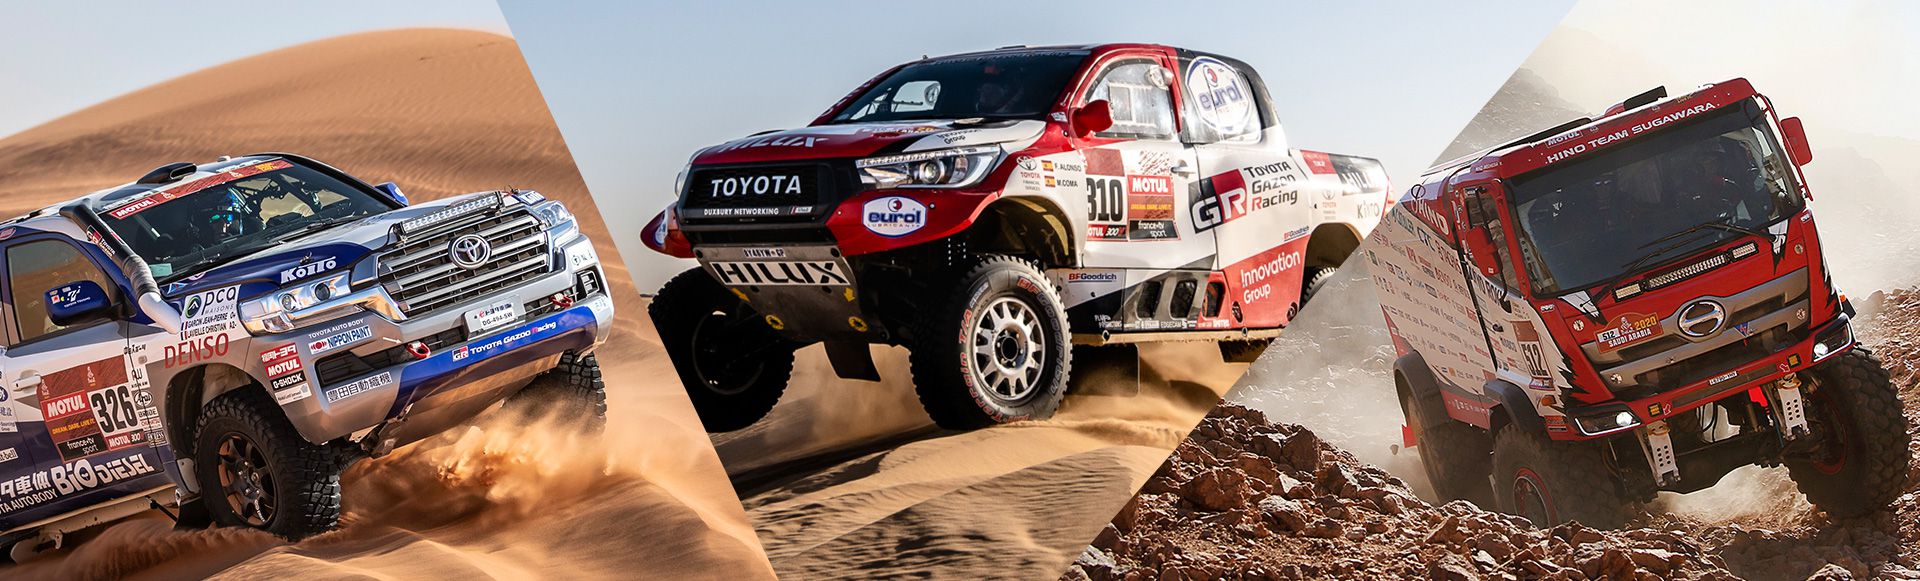 Comment from President Akio Toyoda Concerning the Outcome of the 2020 Dakar Rally